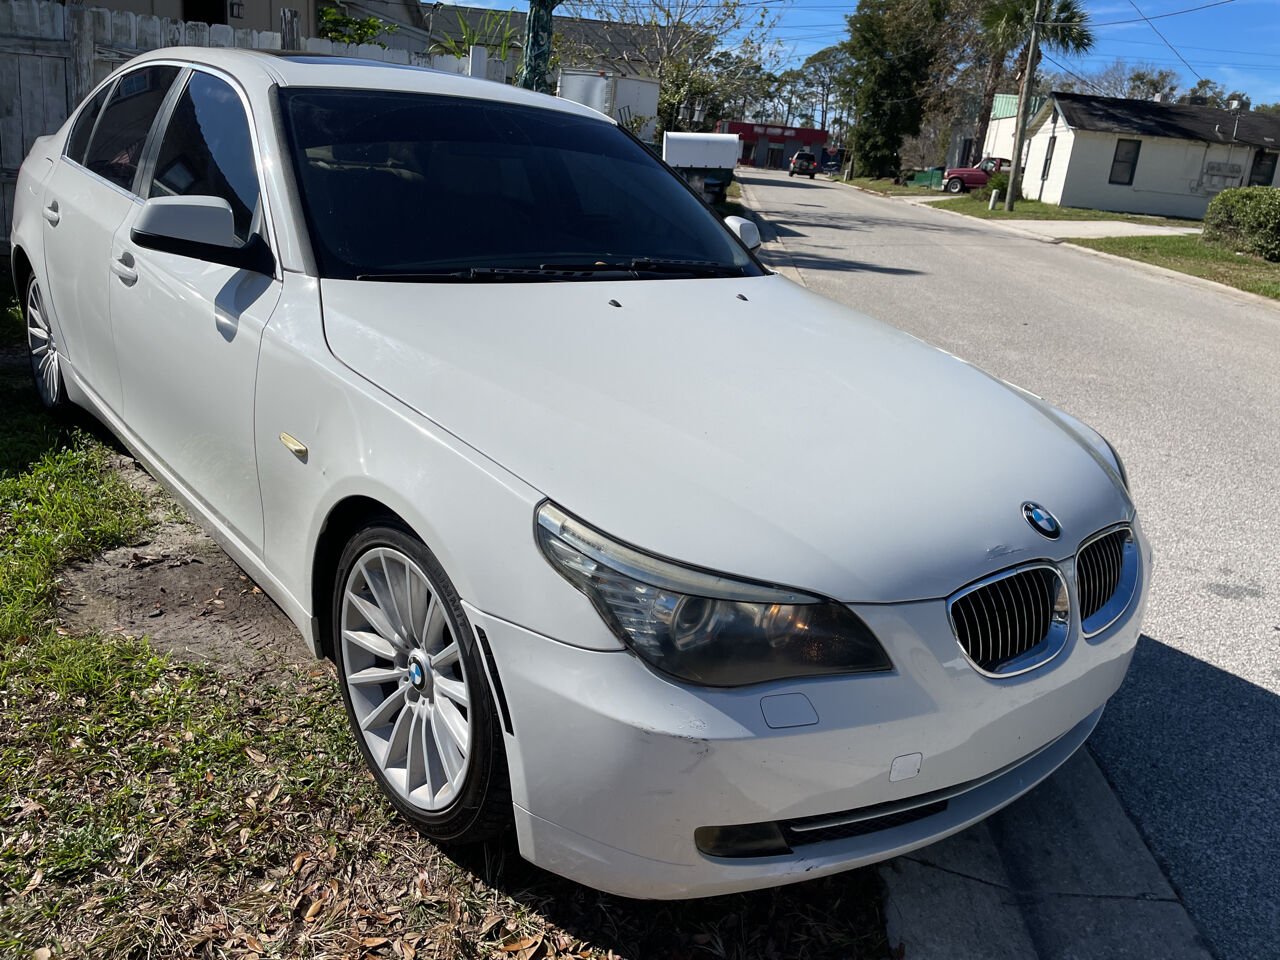 2010 BMW 5 Series For Sale - Carsforsale.com®